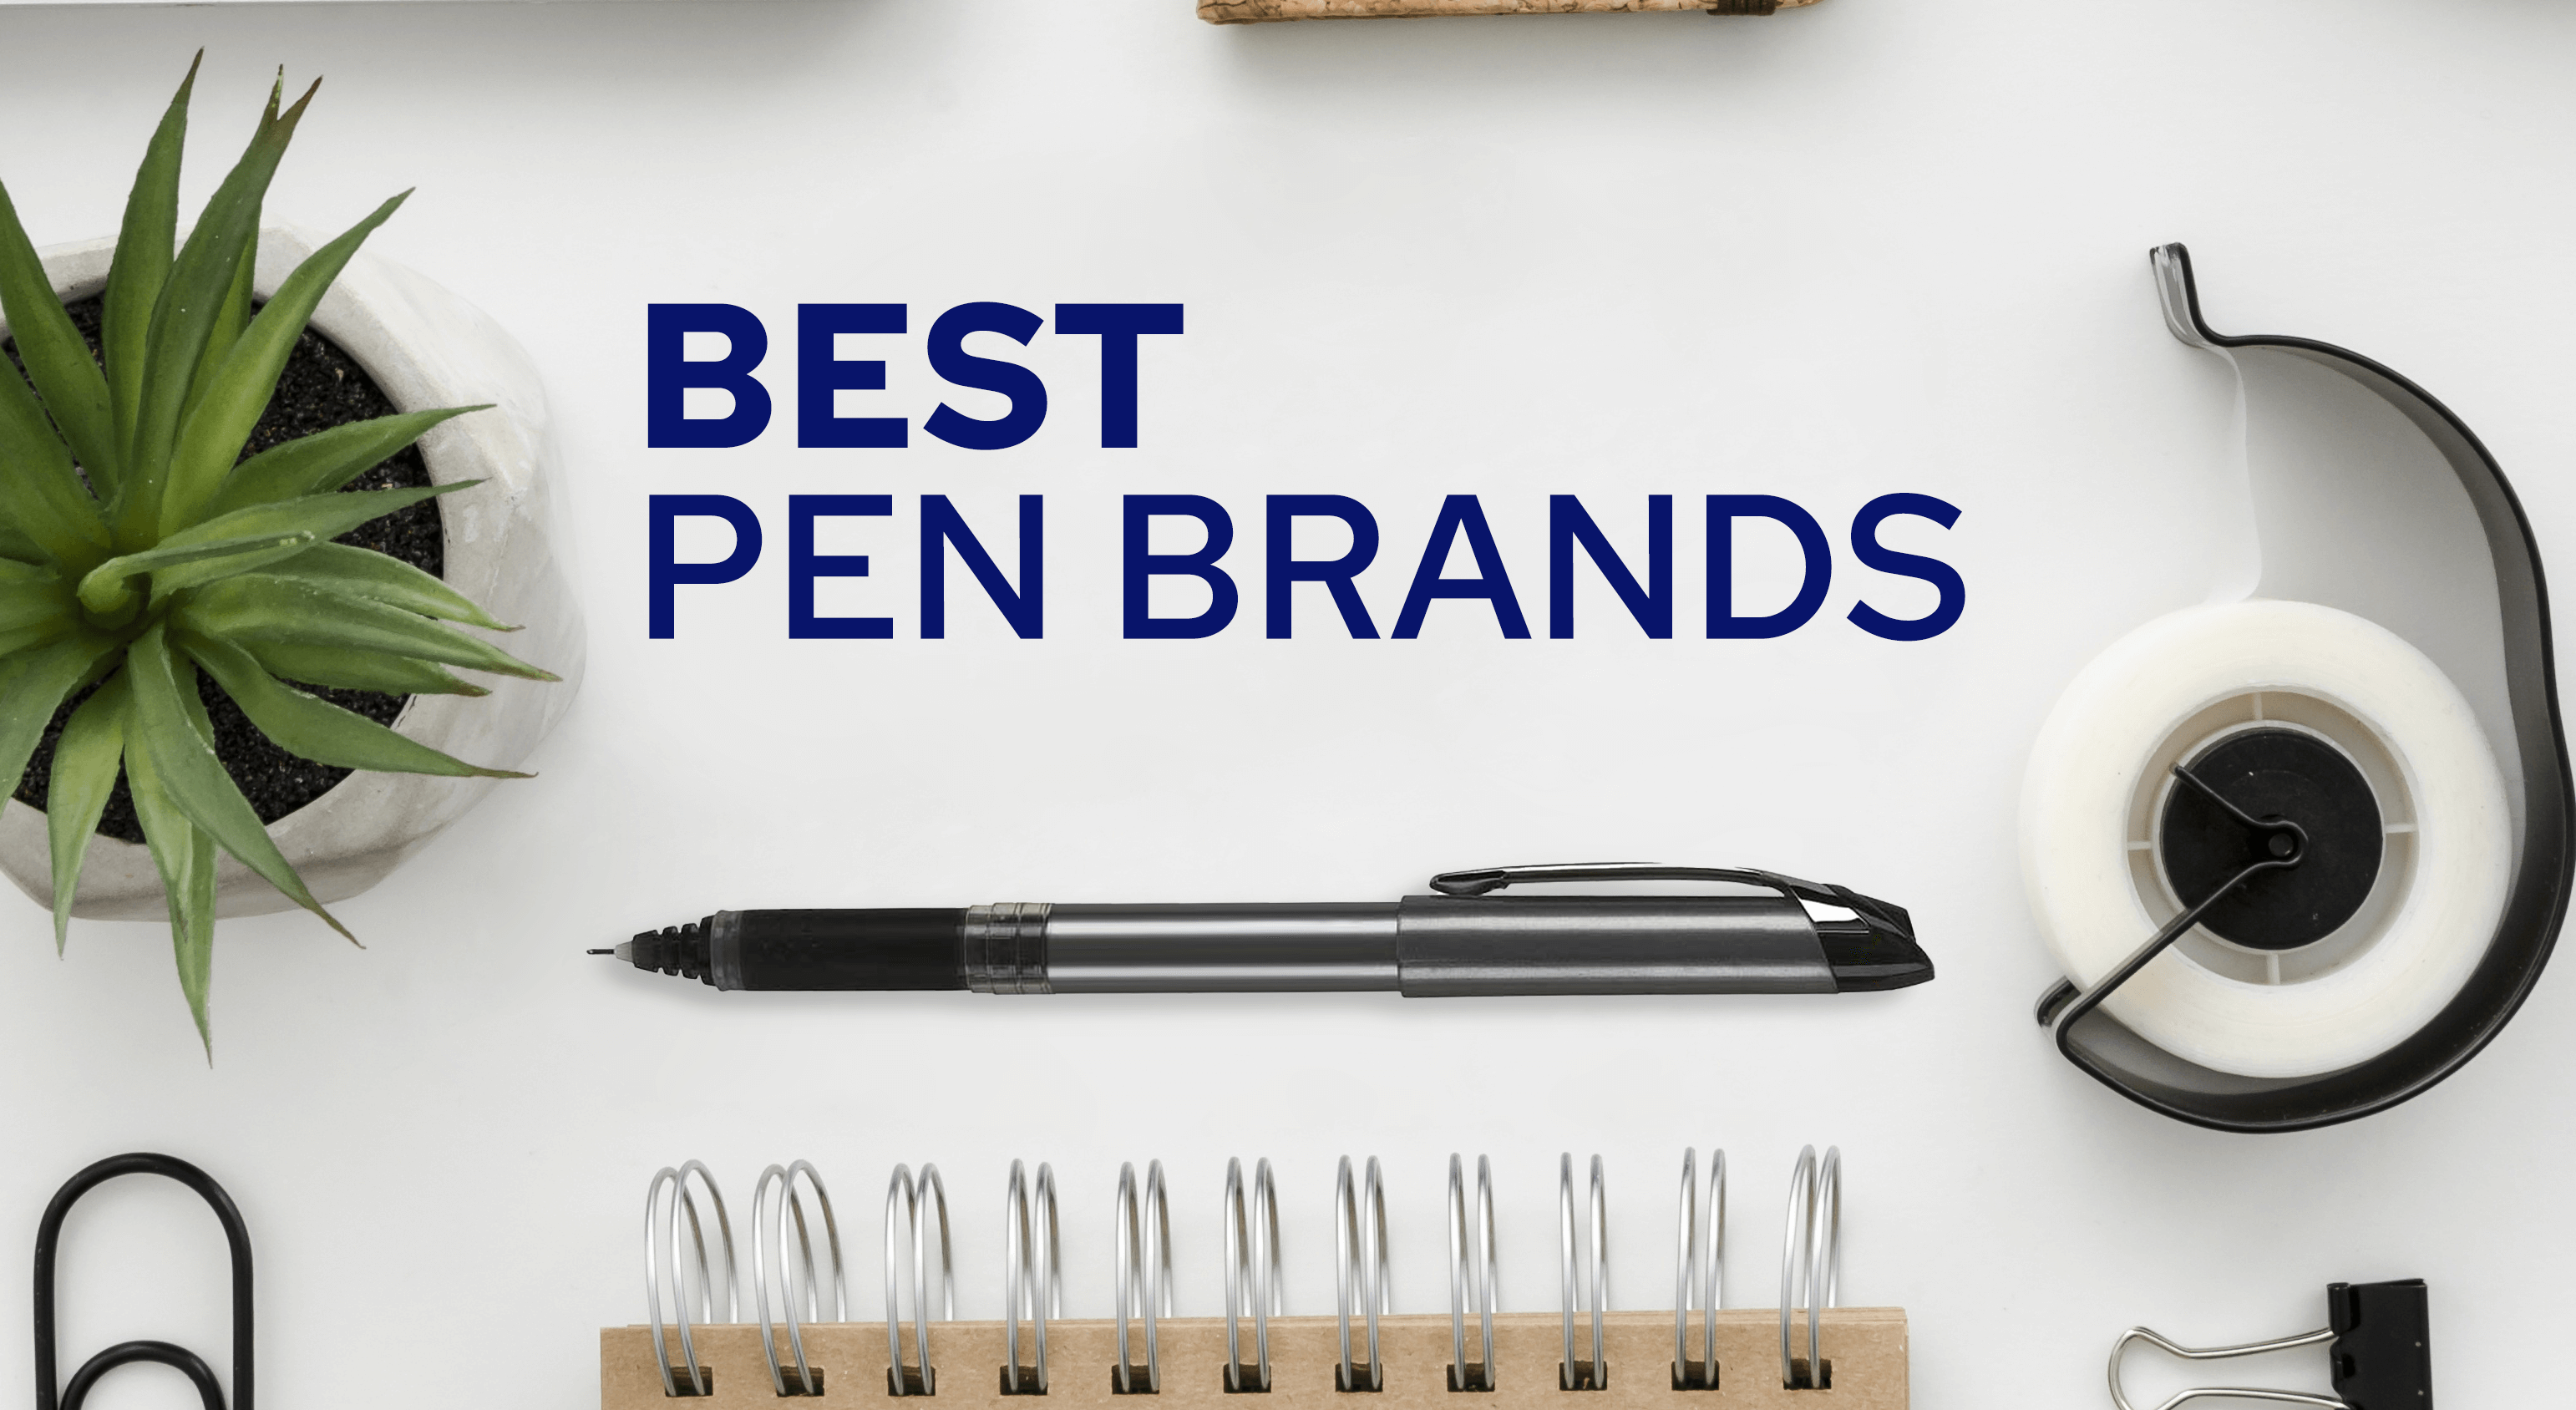 Best pen brand on desk with other accessories including plant, notebook, clip, and tape.